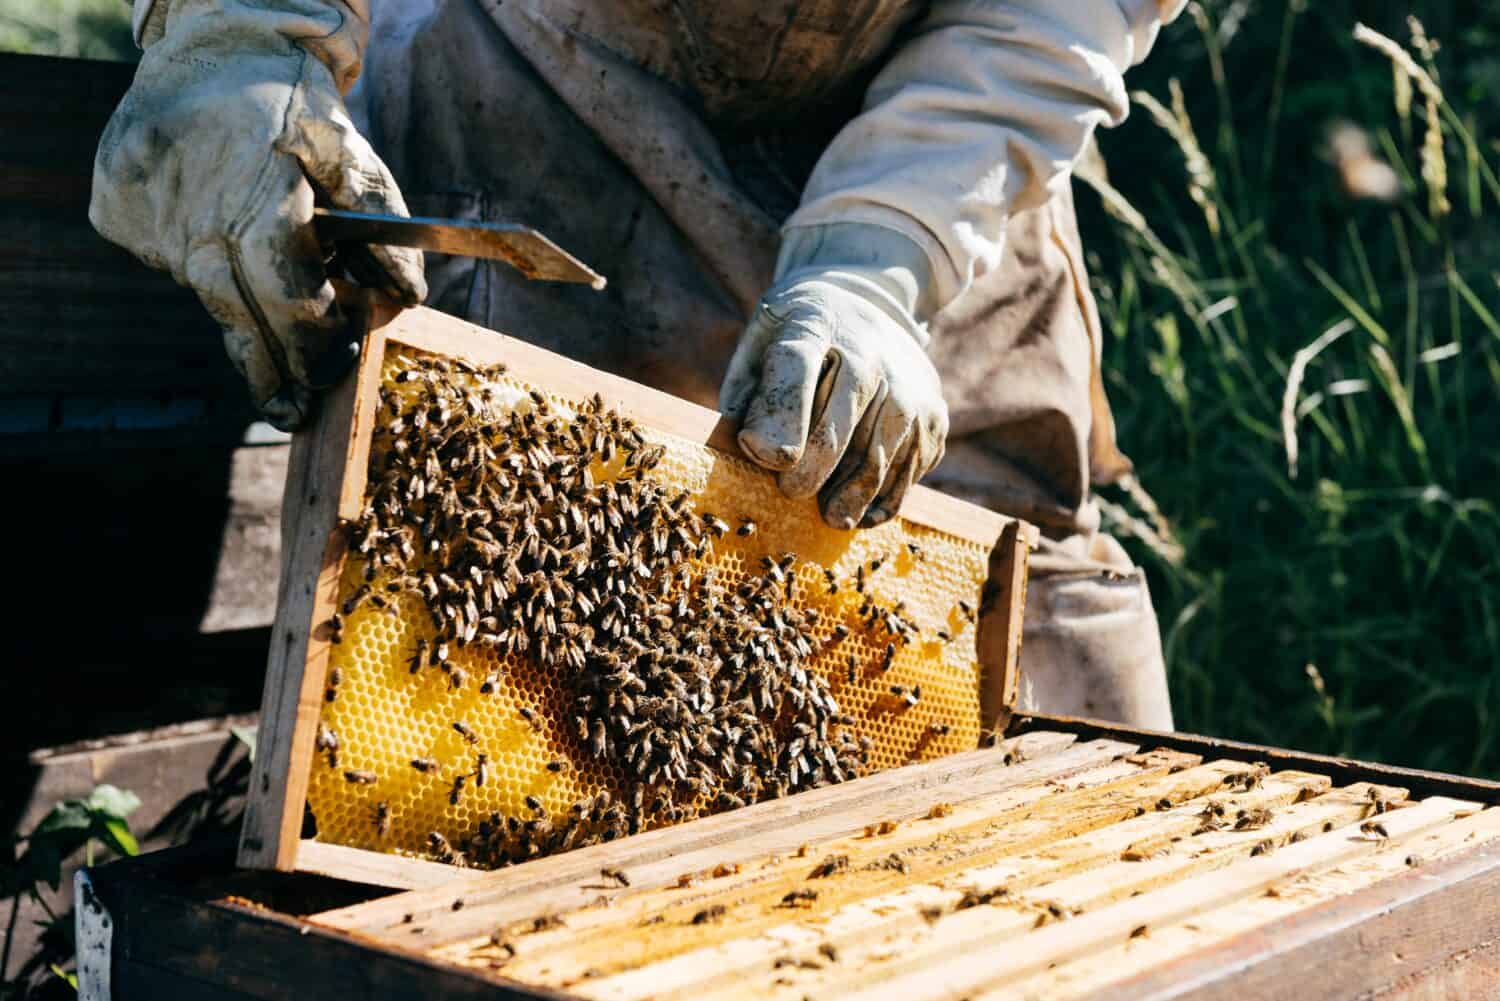 Anonymous honey farmer in protective suit and gloves taking honeycomb with bees from box while working in apiary